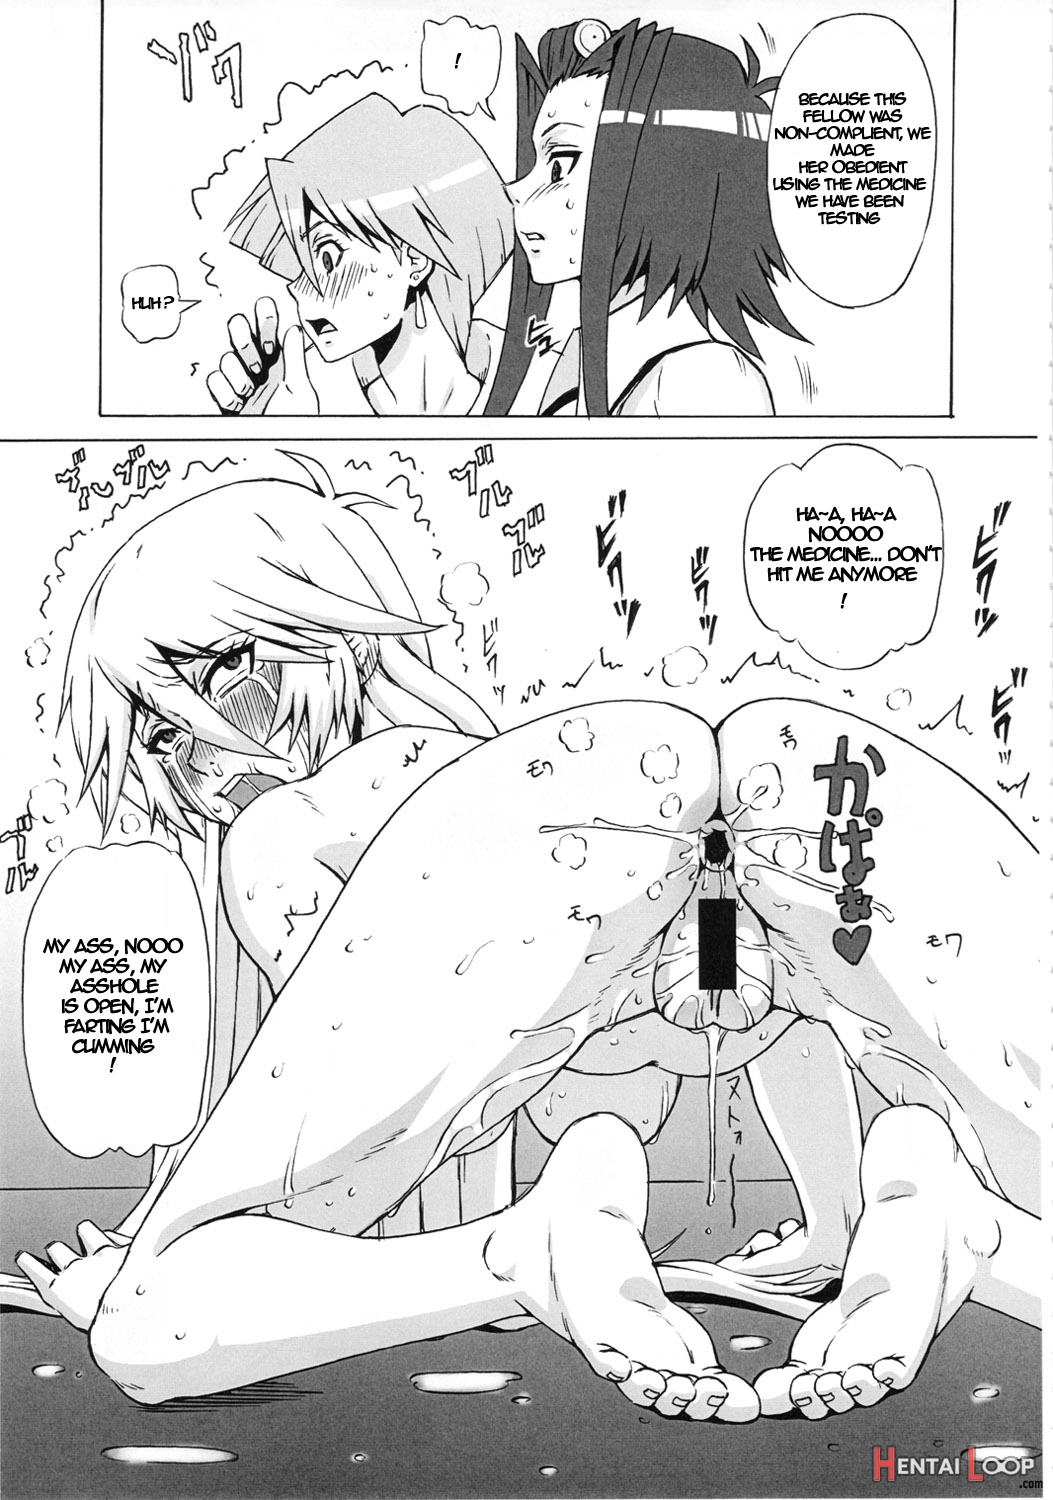 The Various Positions Of Aki And Mikage. page 4